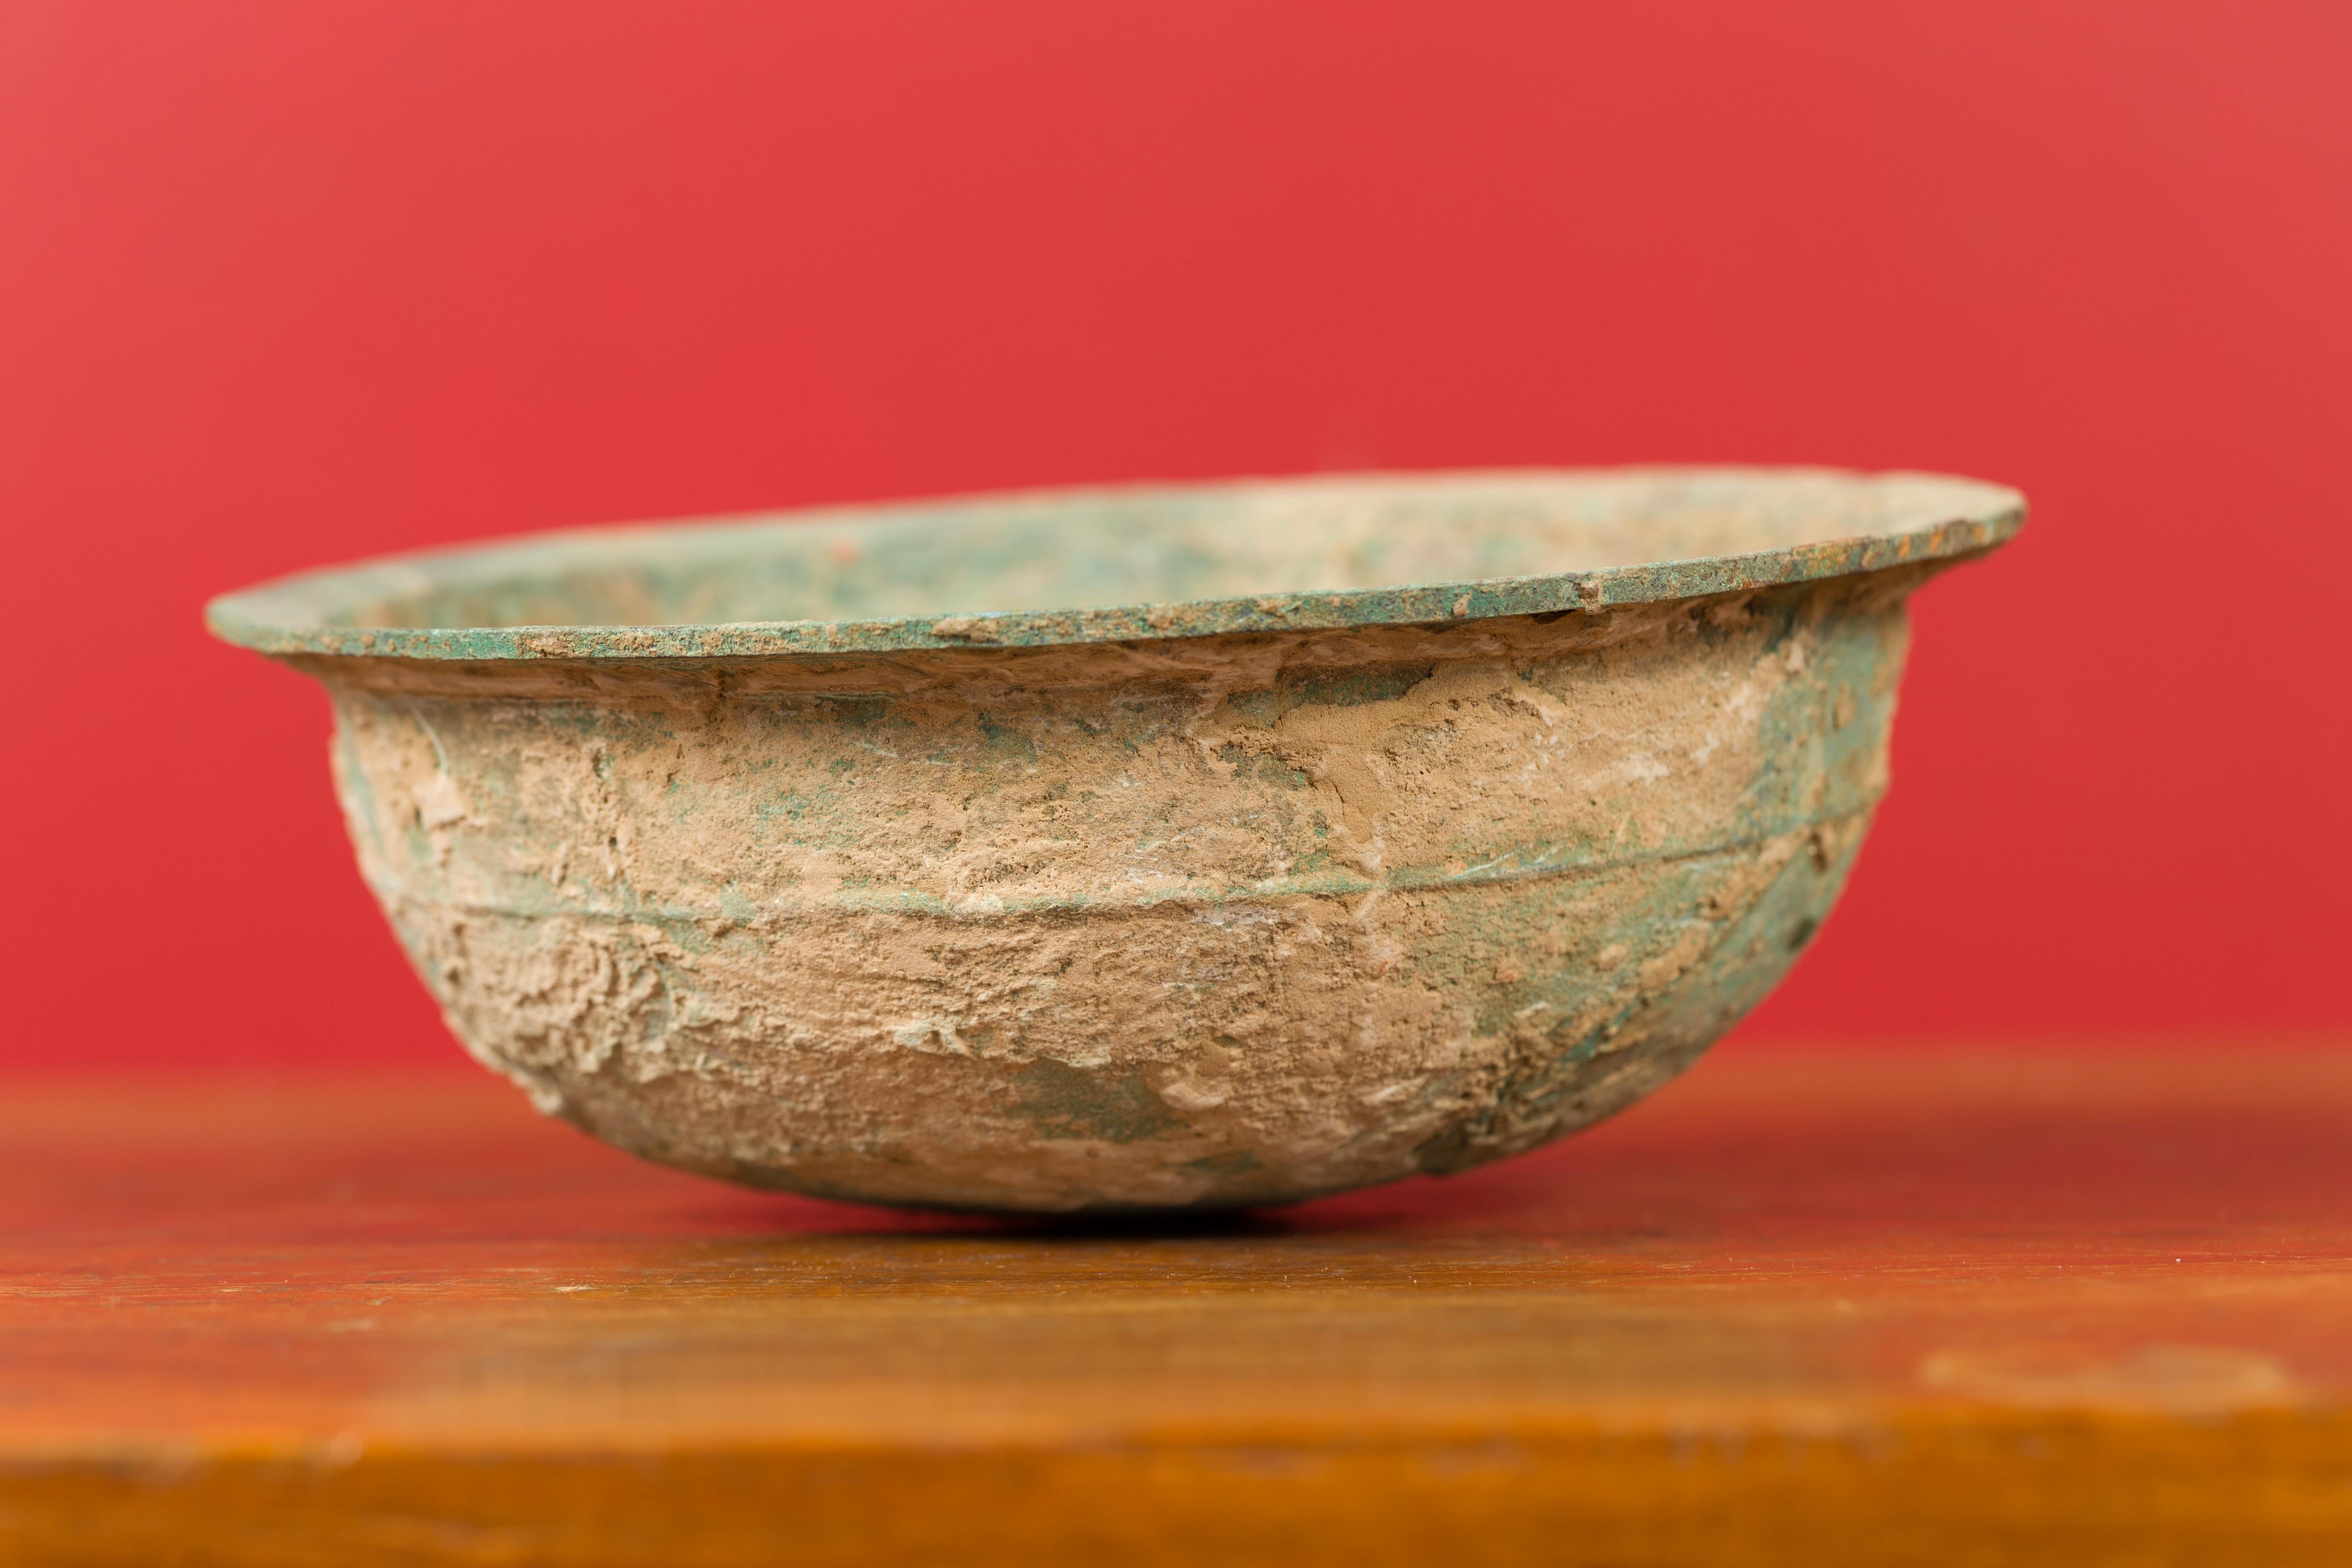 Chinese Han Dynasty Bronze Bowl circa 202 BC-200 AD with Mineral Deposits 3